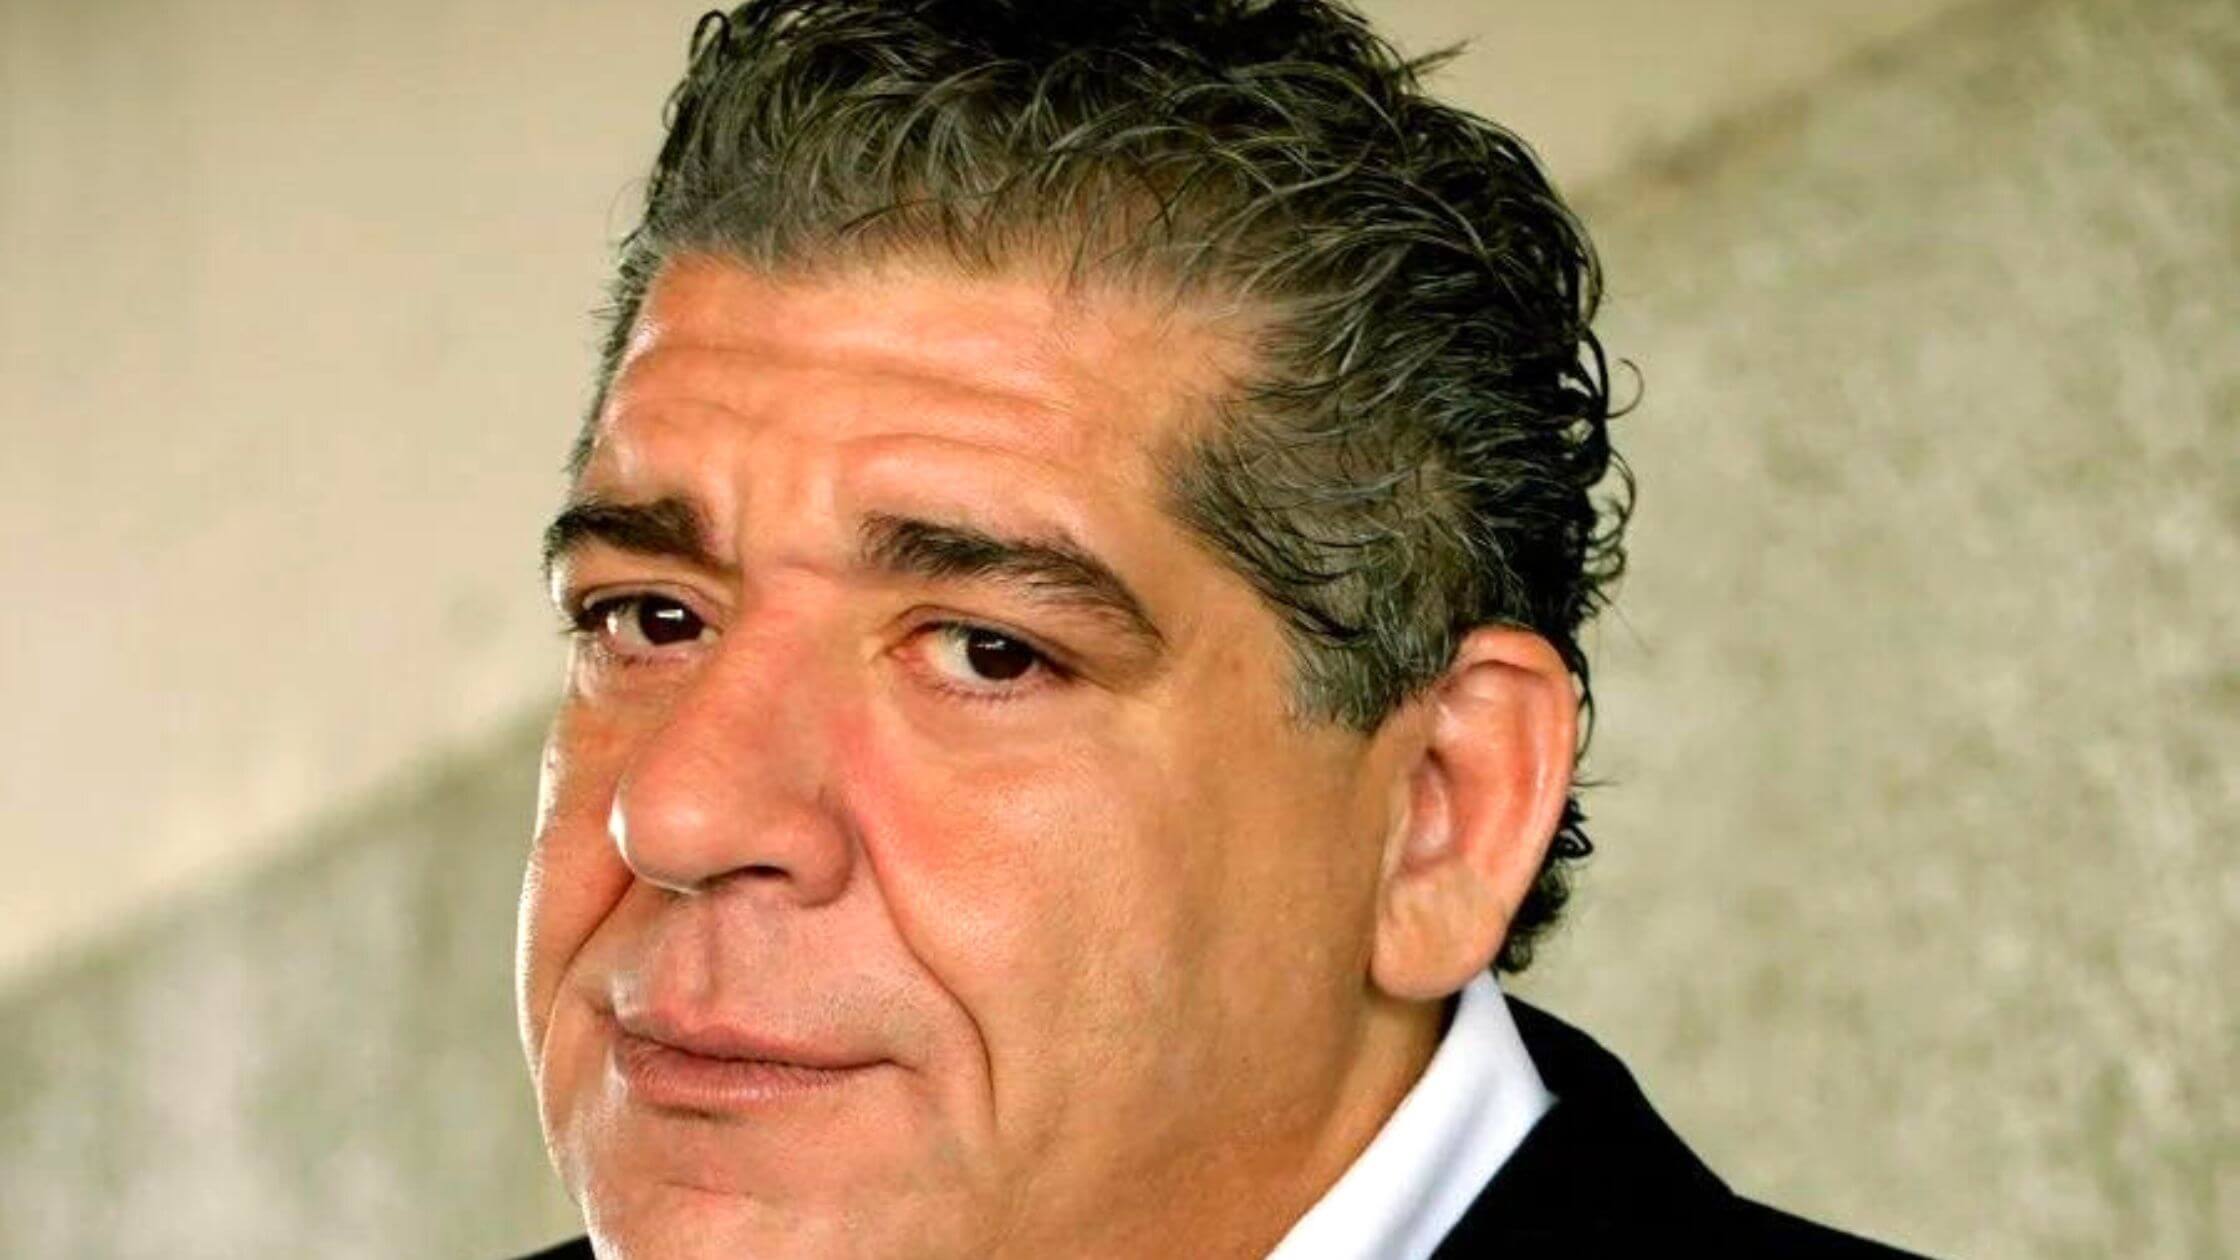 Joey Diaz The Early Life